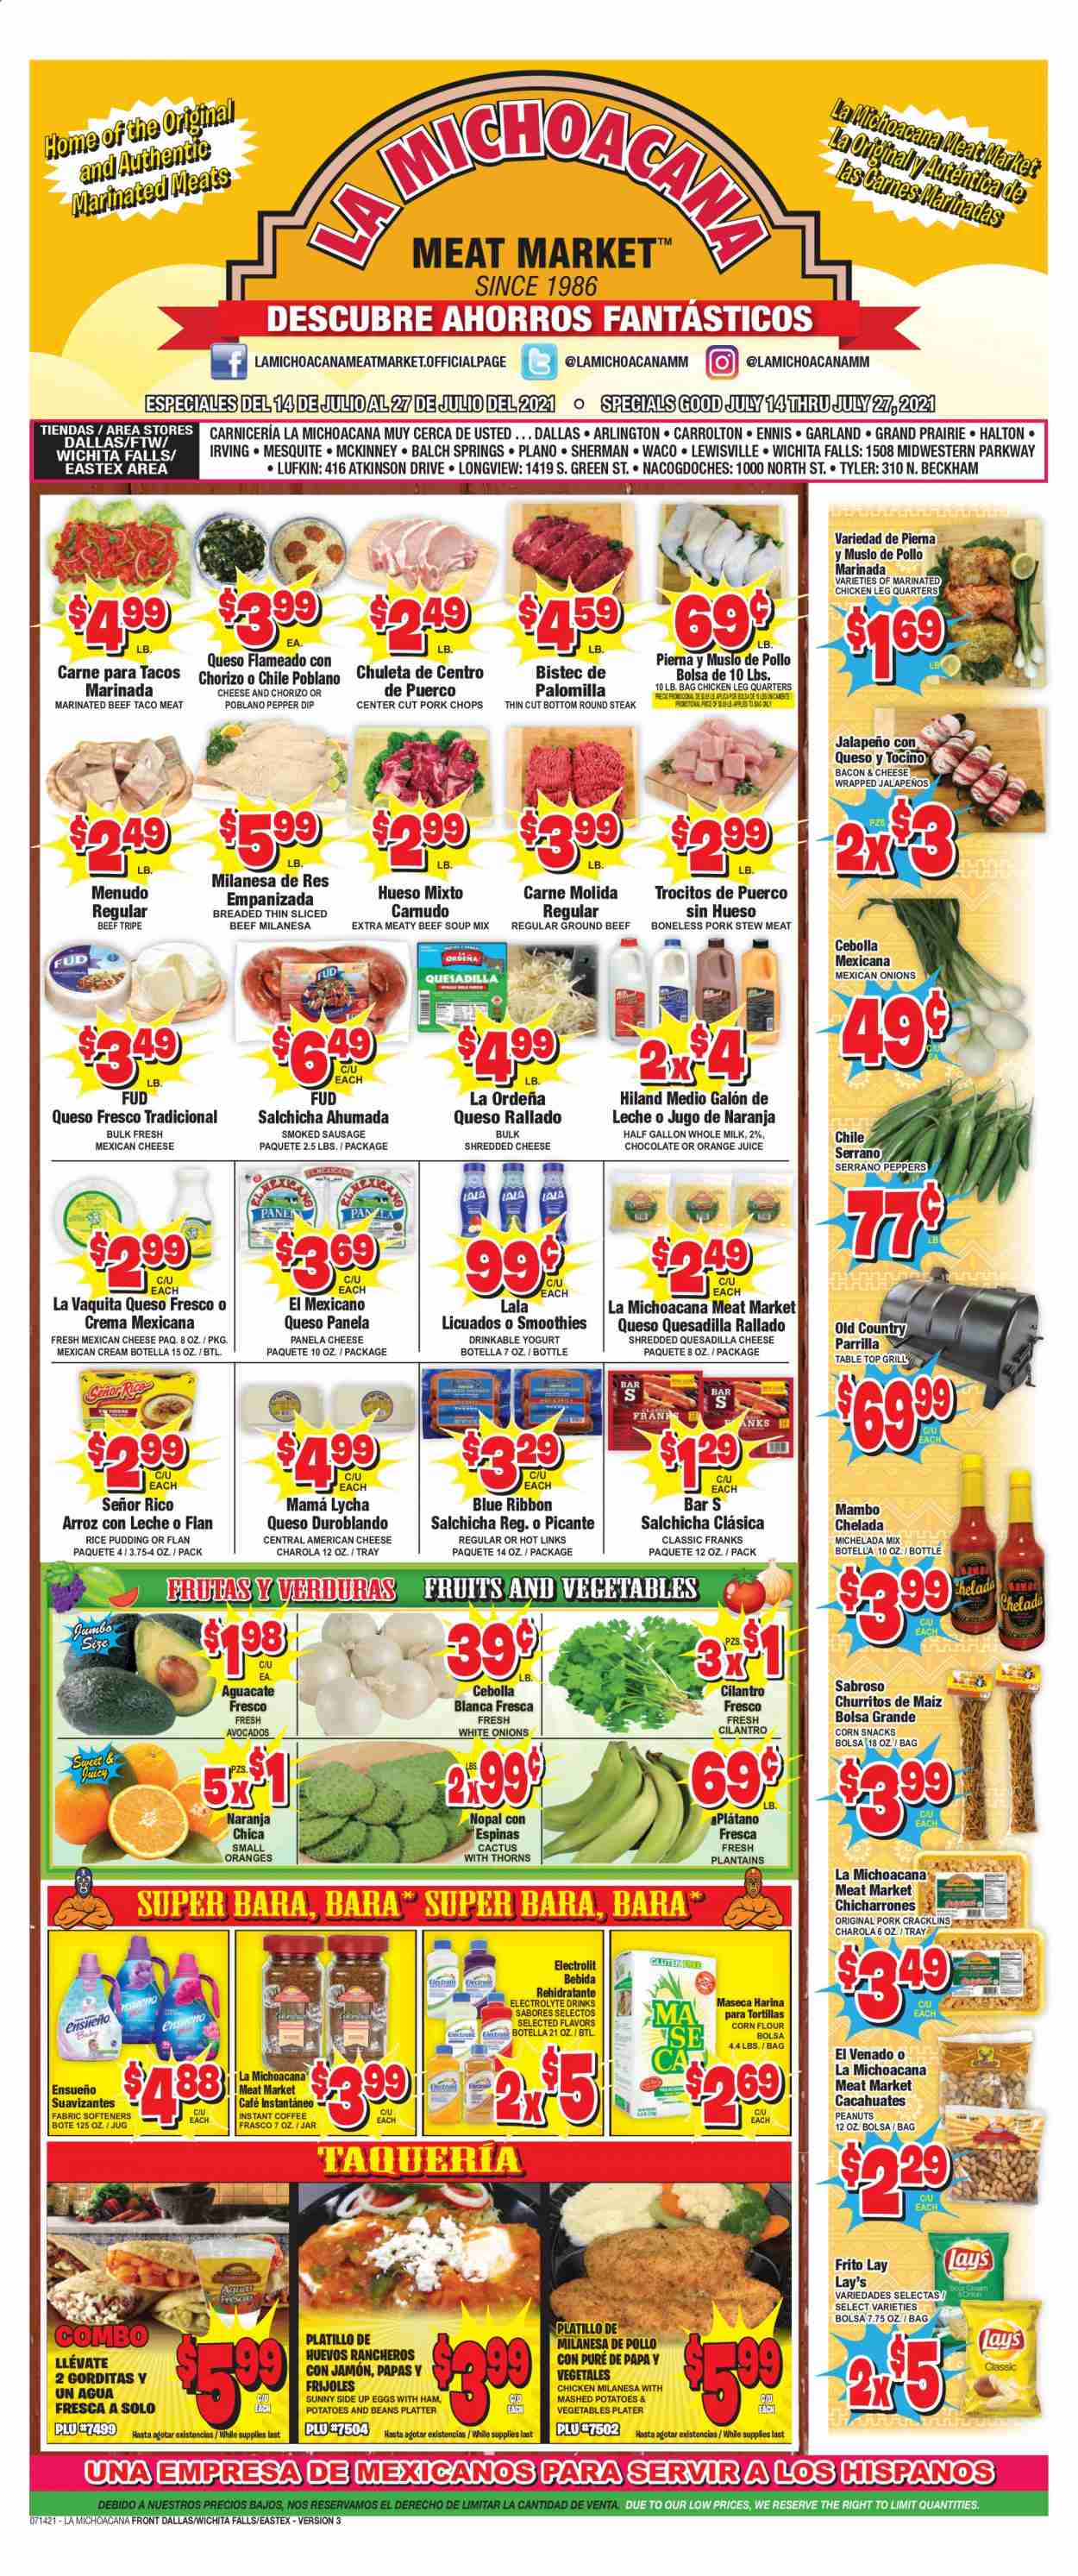 thumbnail - La Michoacana Meat Market Flyer - 07/14/2021 - 07/27/2021 - Sales products - stew meat, tortillas, peppers, jalapeño, avocado, mashed potatoes, soup mix, soup, bacon, ham, chorizo, sausage, smoked sausage, american cheese, shredded cheese, queso fresco, Panela cheese, yoghurt, rice pudding, milk, eggs, dip, chocolate, snack, Lay’s, corn flour, cilantro, peanuts, orange juice, juice, smoothie, coffee, chicken legs, marinated chicken, beef meat, beef tripe, ground beef, steak, round steak, marinated beef, pork chops, pork meat, gallon, tray, pan, jar, plantains. Page 1.